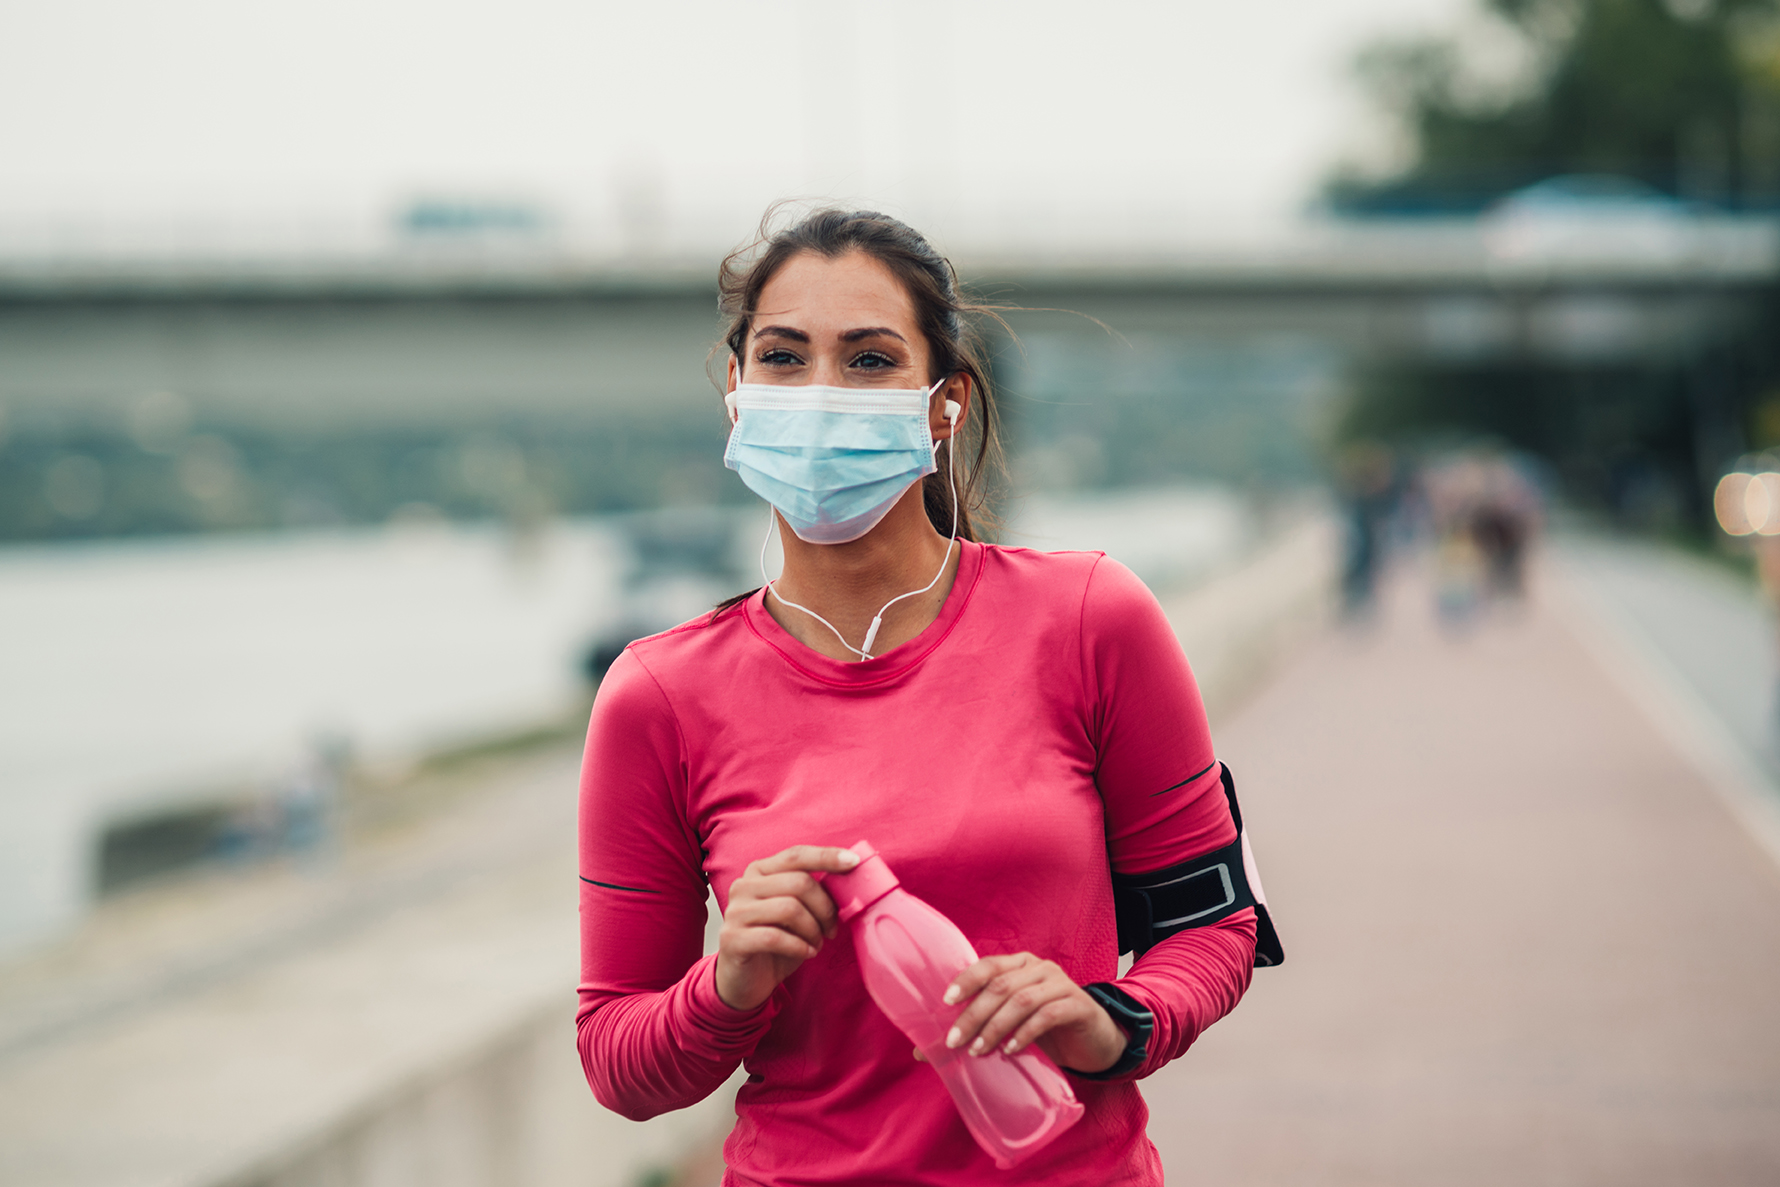 Female runner wearing protective face mask while jogging outdoors during Coronavirus/COVID-19 pandemic. Young woman running in the city next to the river and wearing a protective face mask to protecting from viruses and infections.